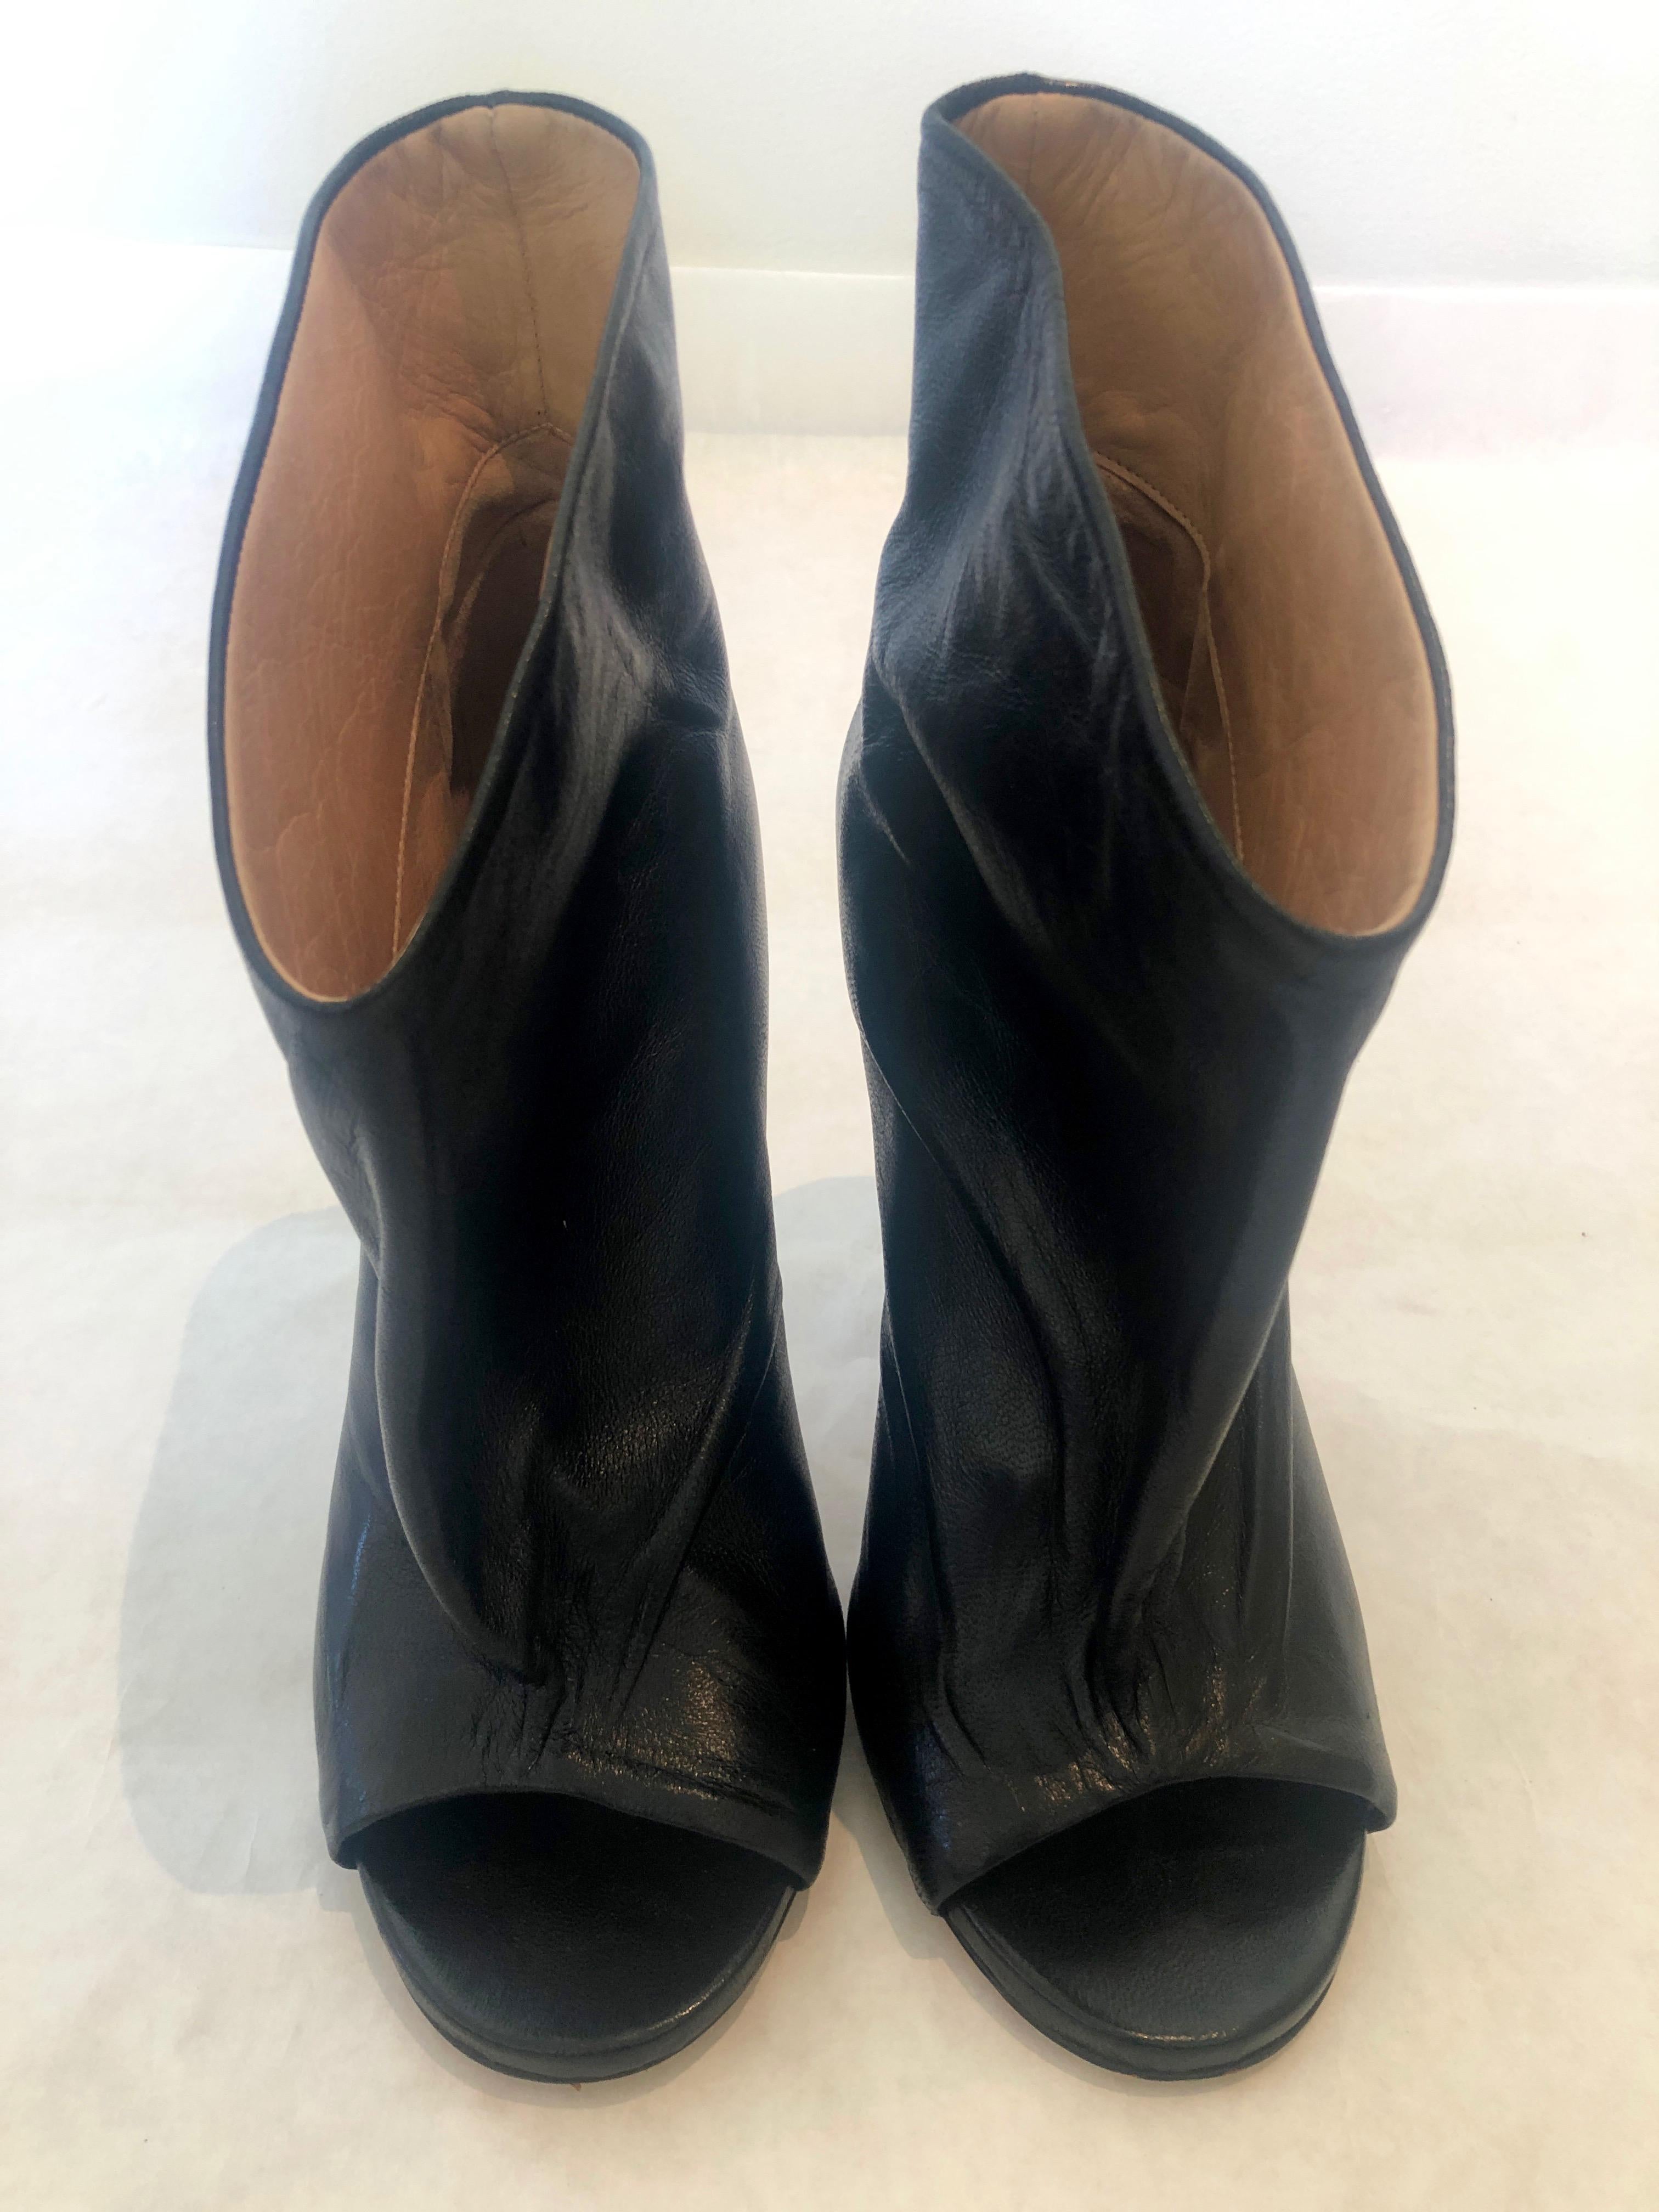 Pair of Maison Martin Margiala Black Open Toe Ankle Boots w/ Wide Unfitted Top  For Sale 10